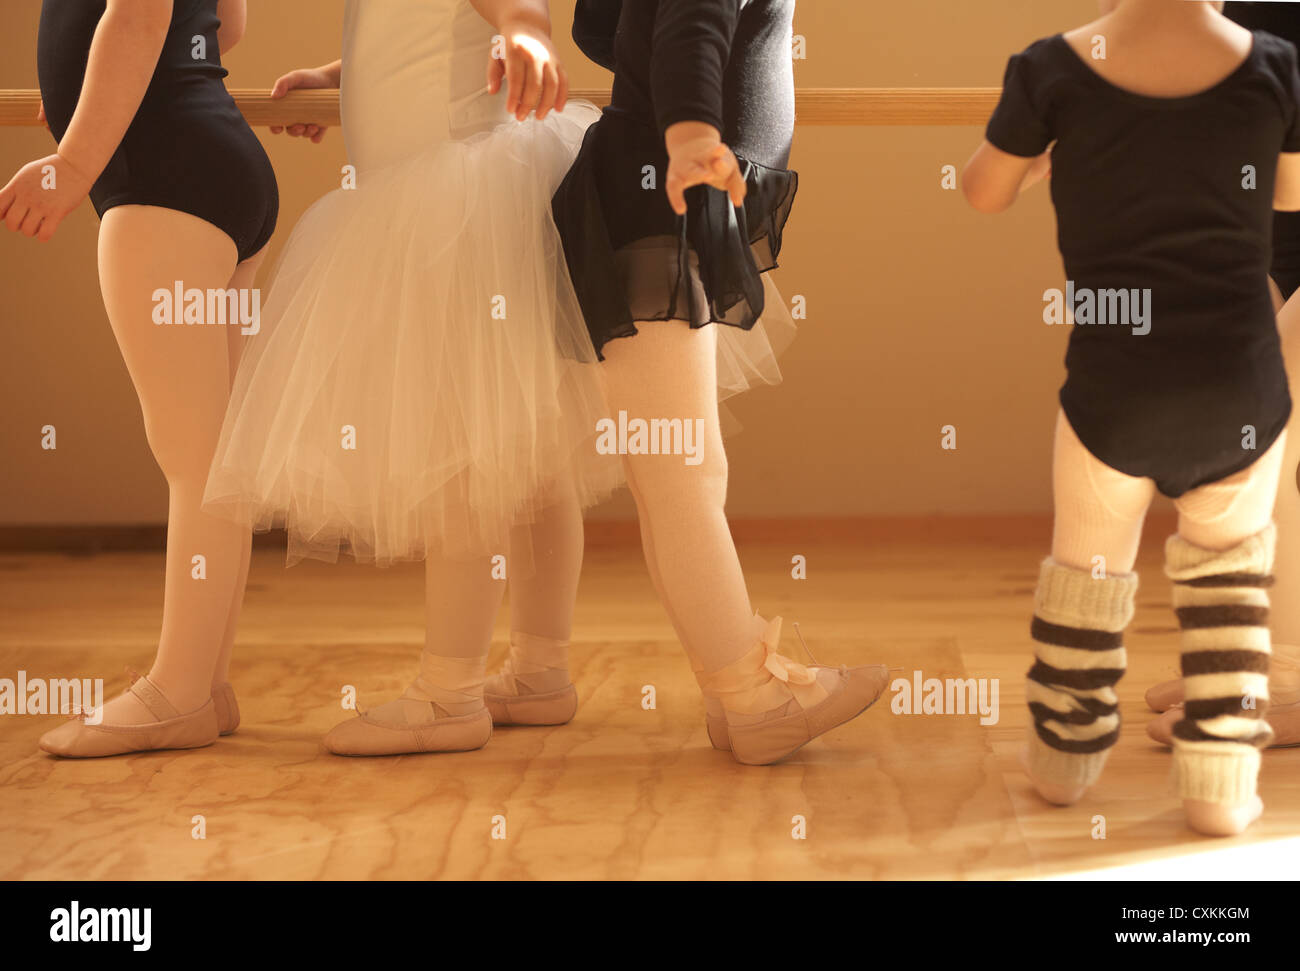 young girls dancing at a ballet barre Stock Photo